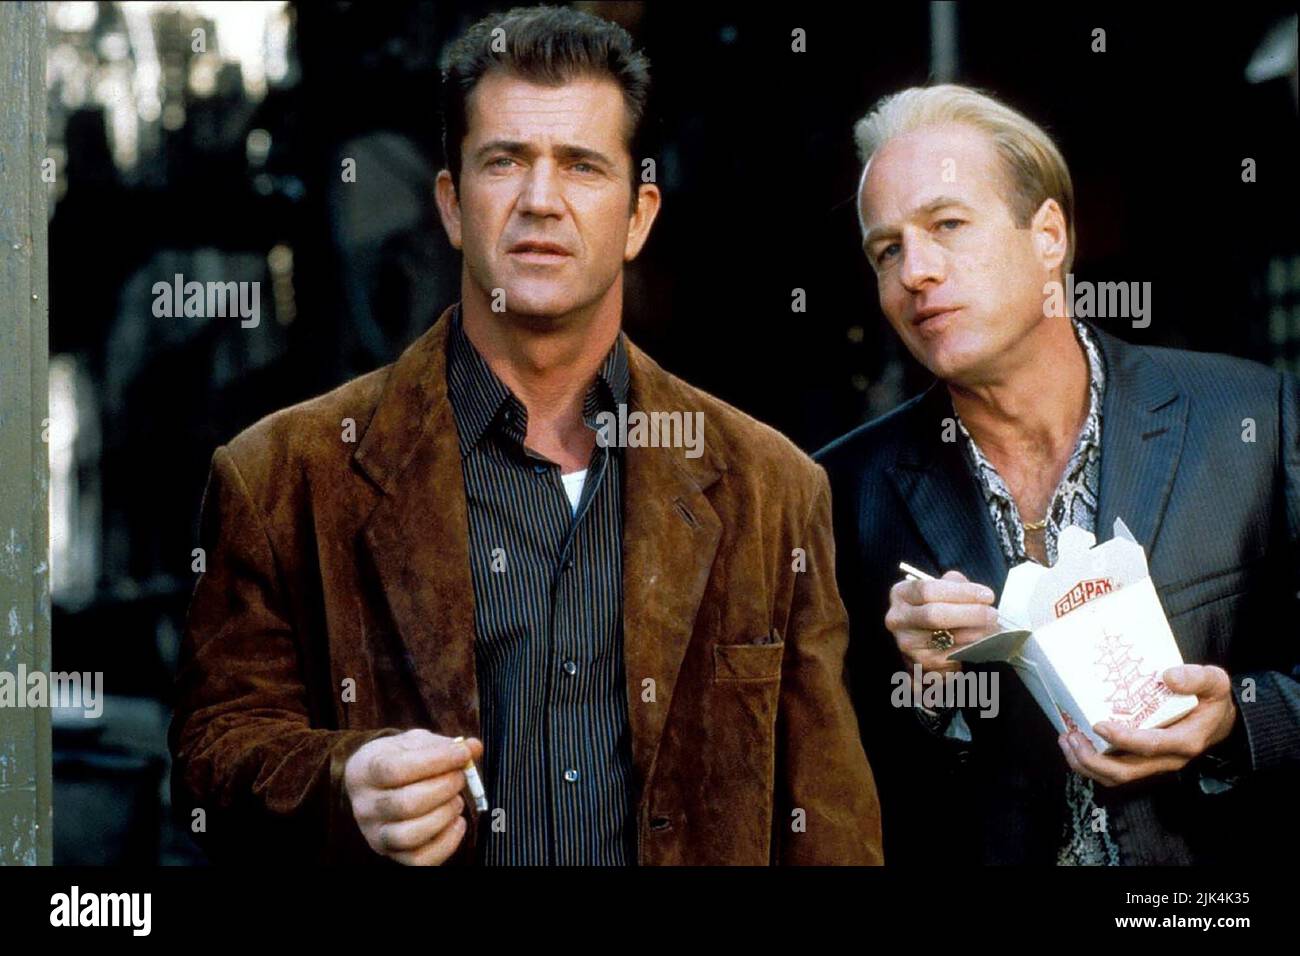 GIBSON,HENRY, PAYBACK, 1999 Stock Photo